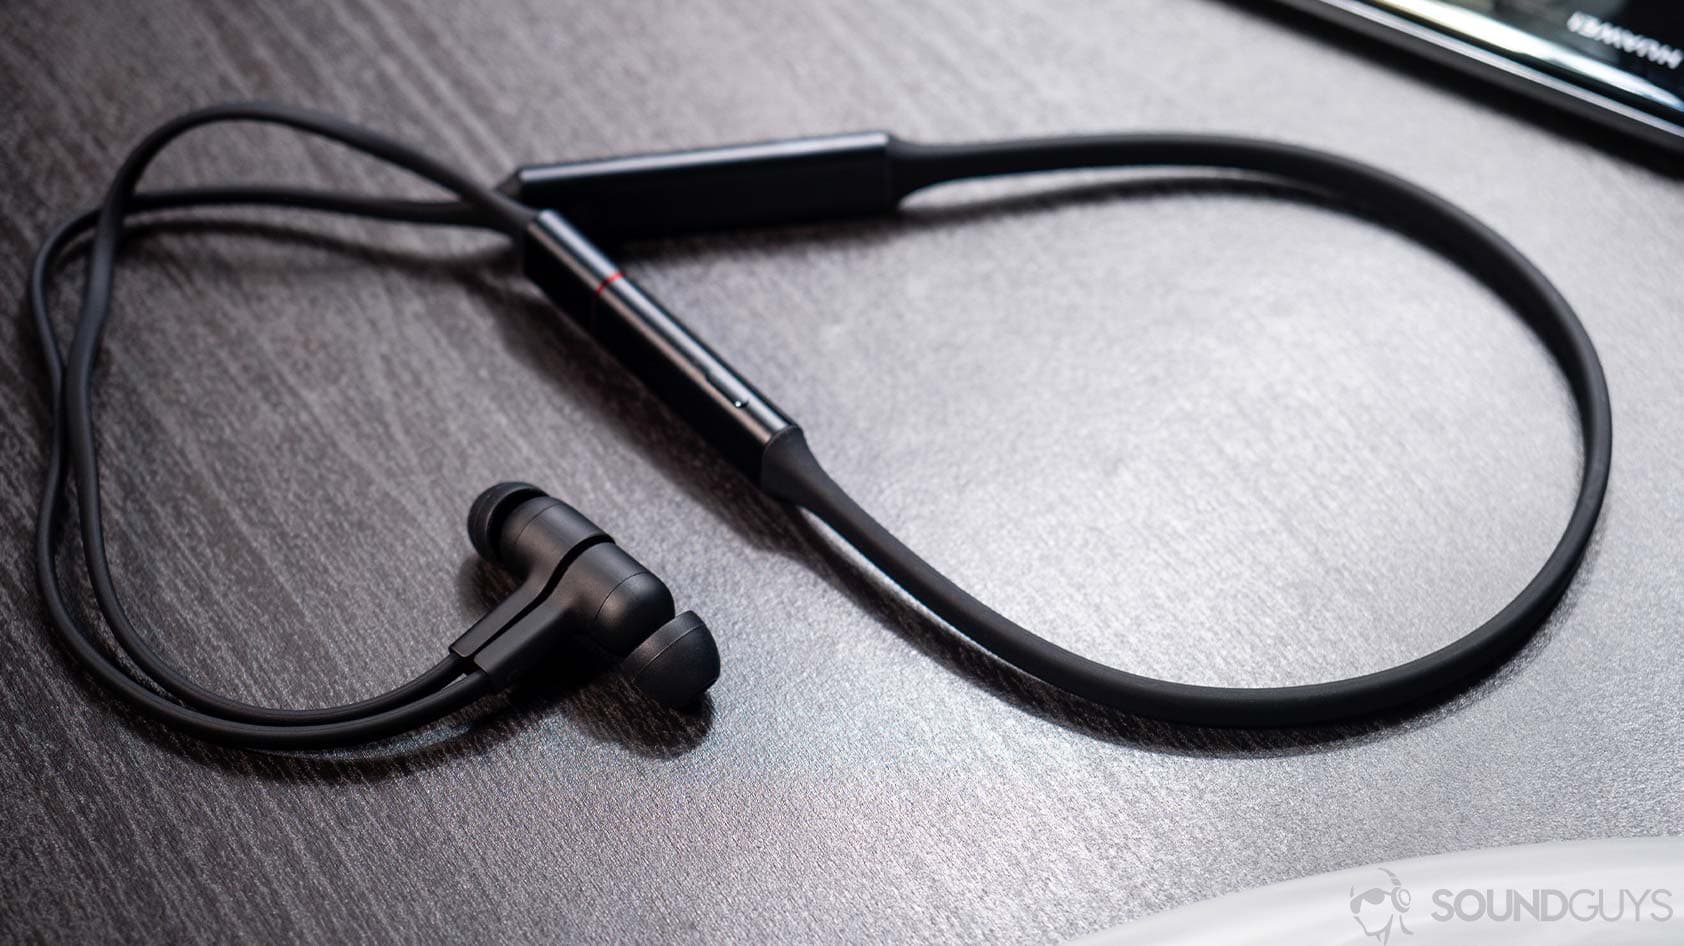 Huawei Freelace: Full shot of the neckband earbuds on a wooden surface.